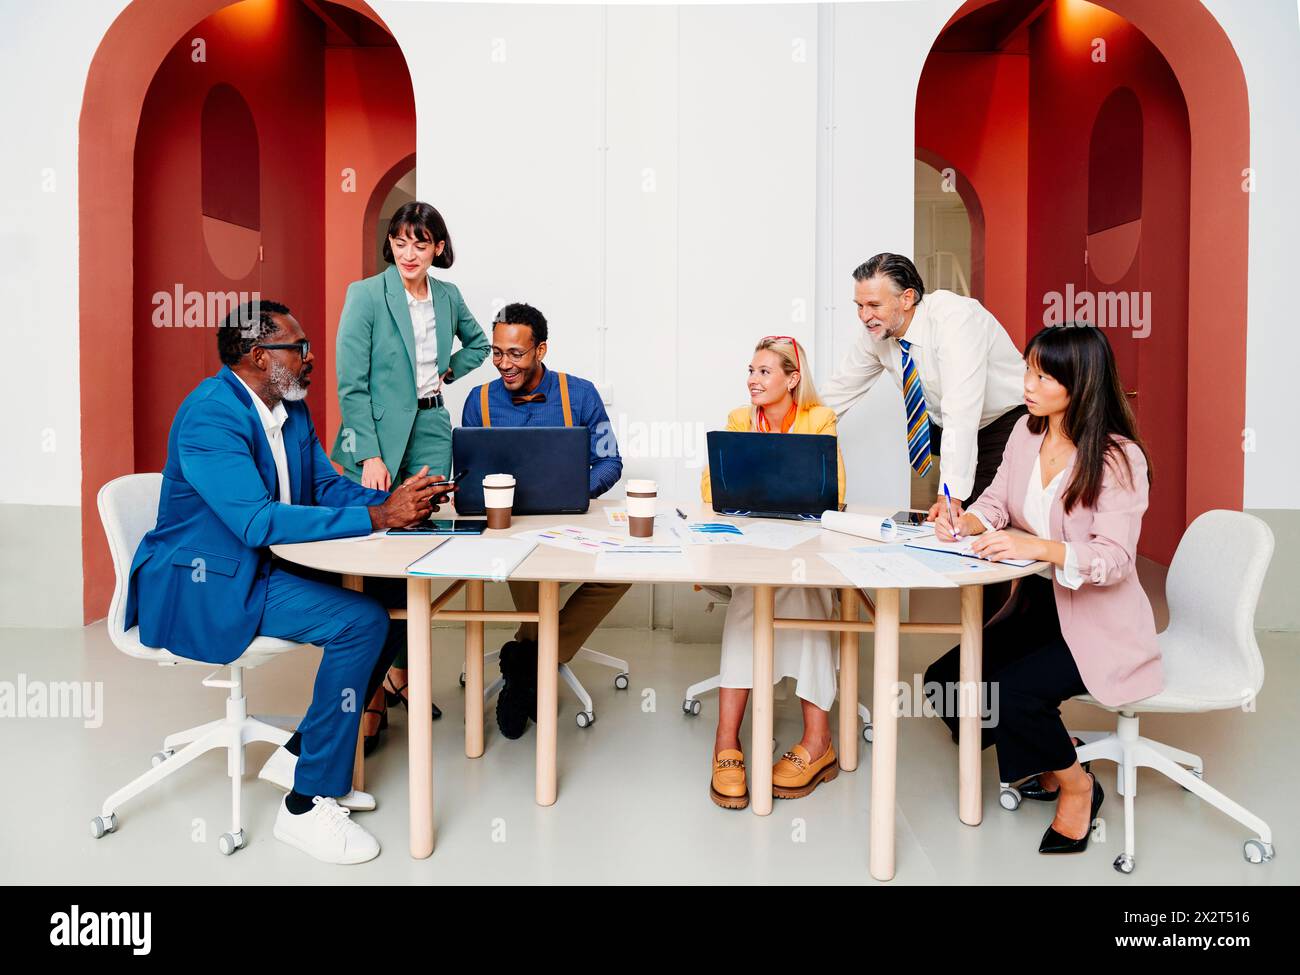 Corporate business colleagues working together at desk in office Stock Photo